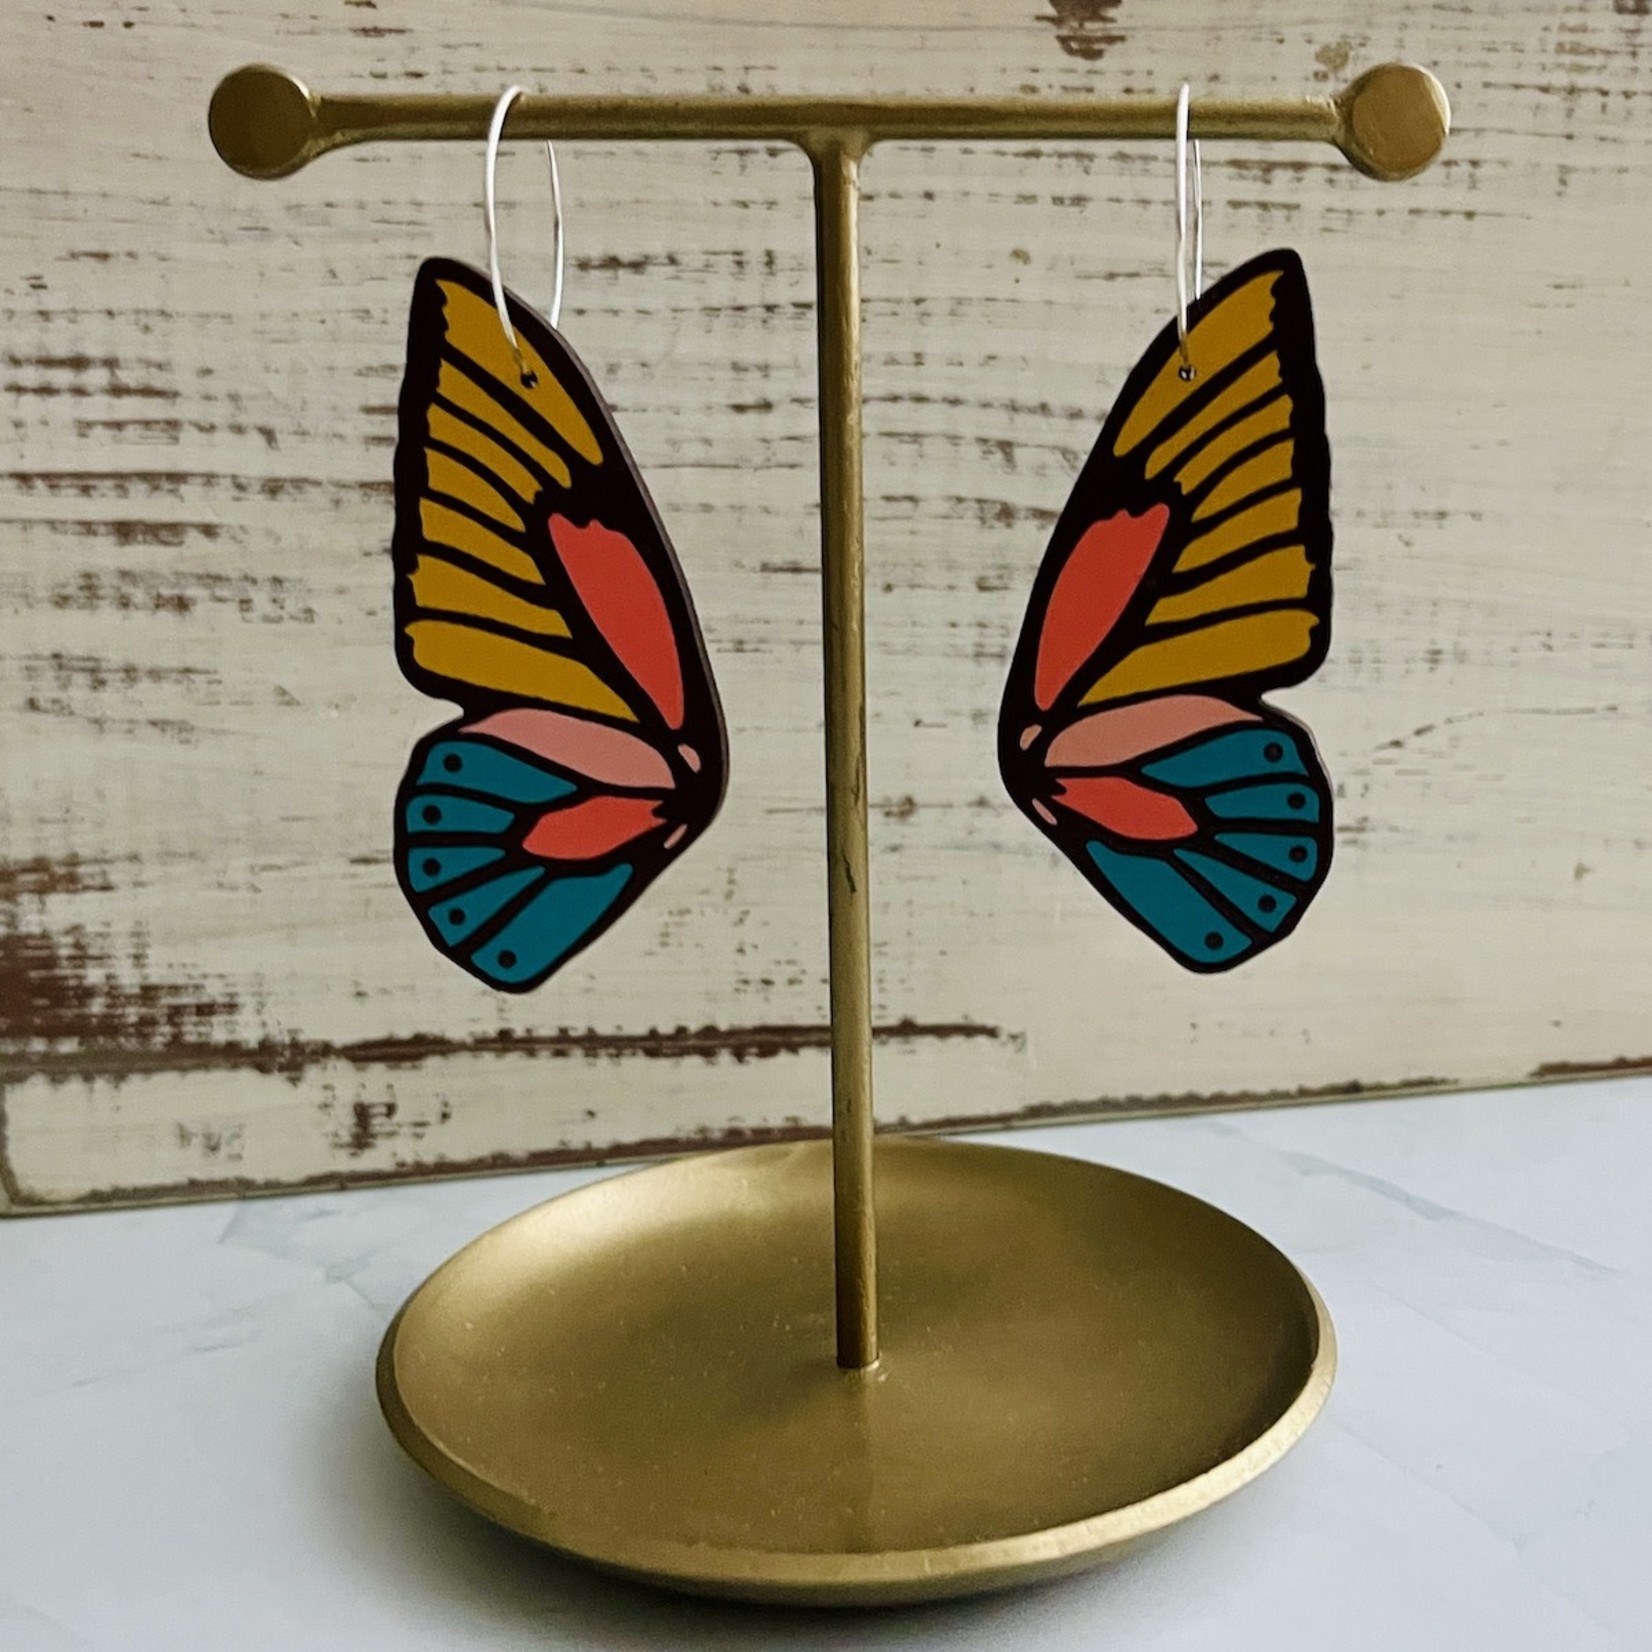 Le Chic Miami c/o Faire Butterfly Wing Earrings by Le Chic Miami